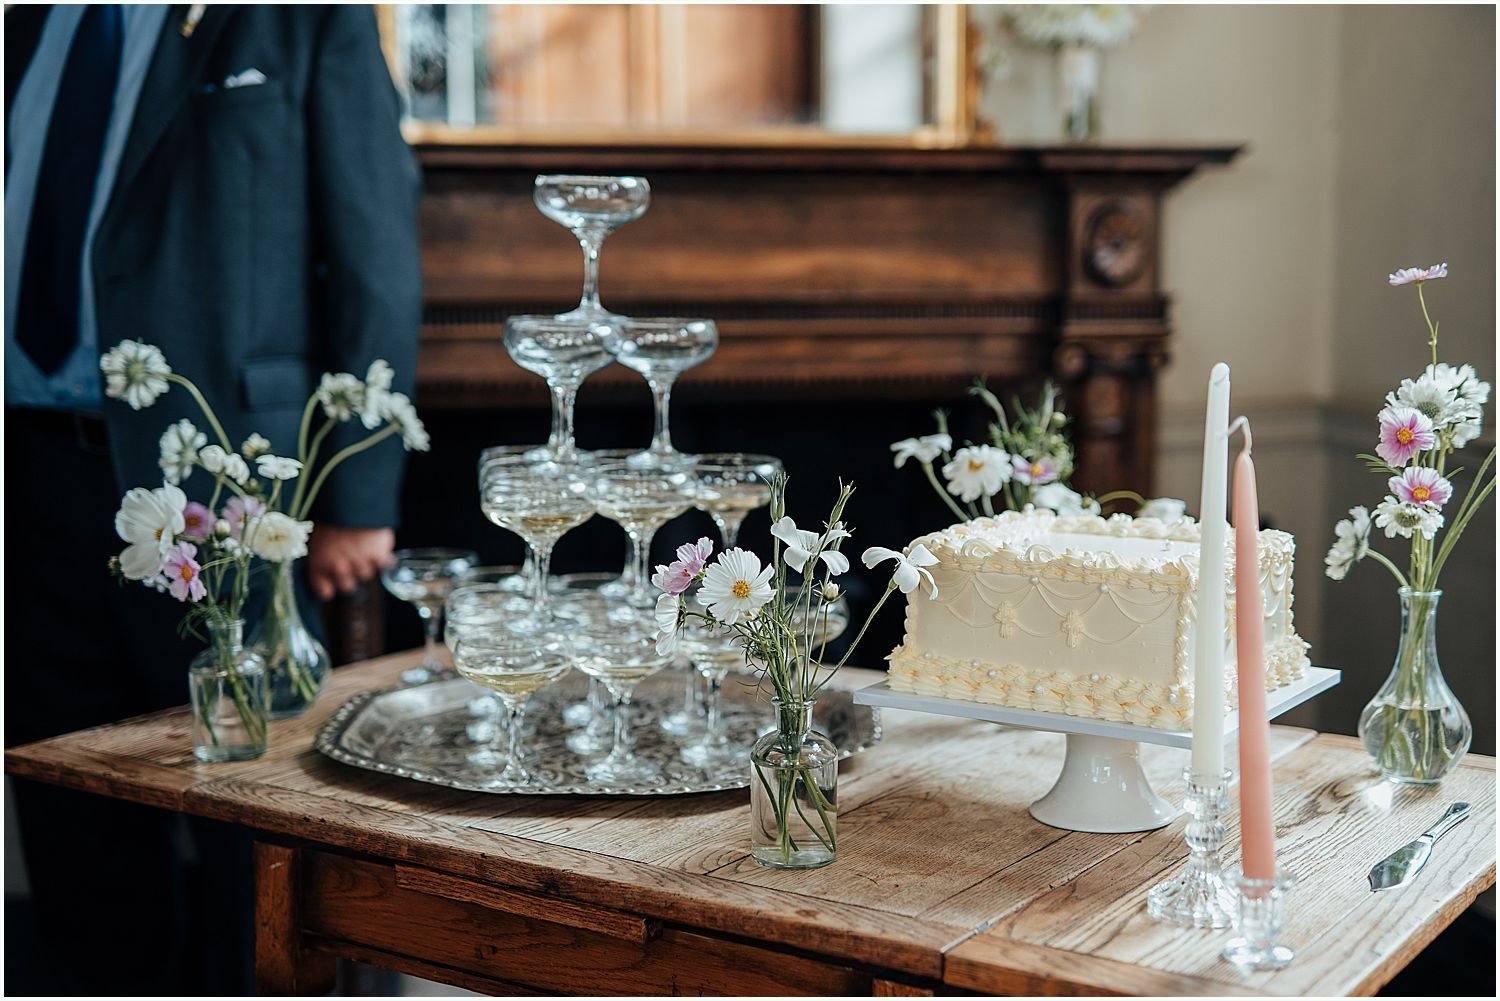 Champagne tower and wedding cake at the Lady Ottoline pub